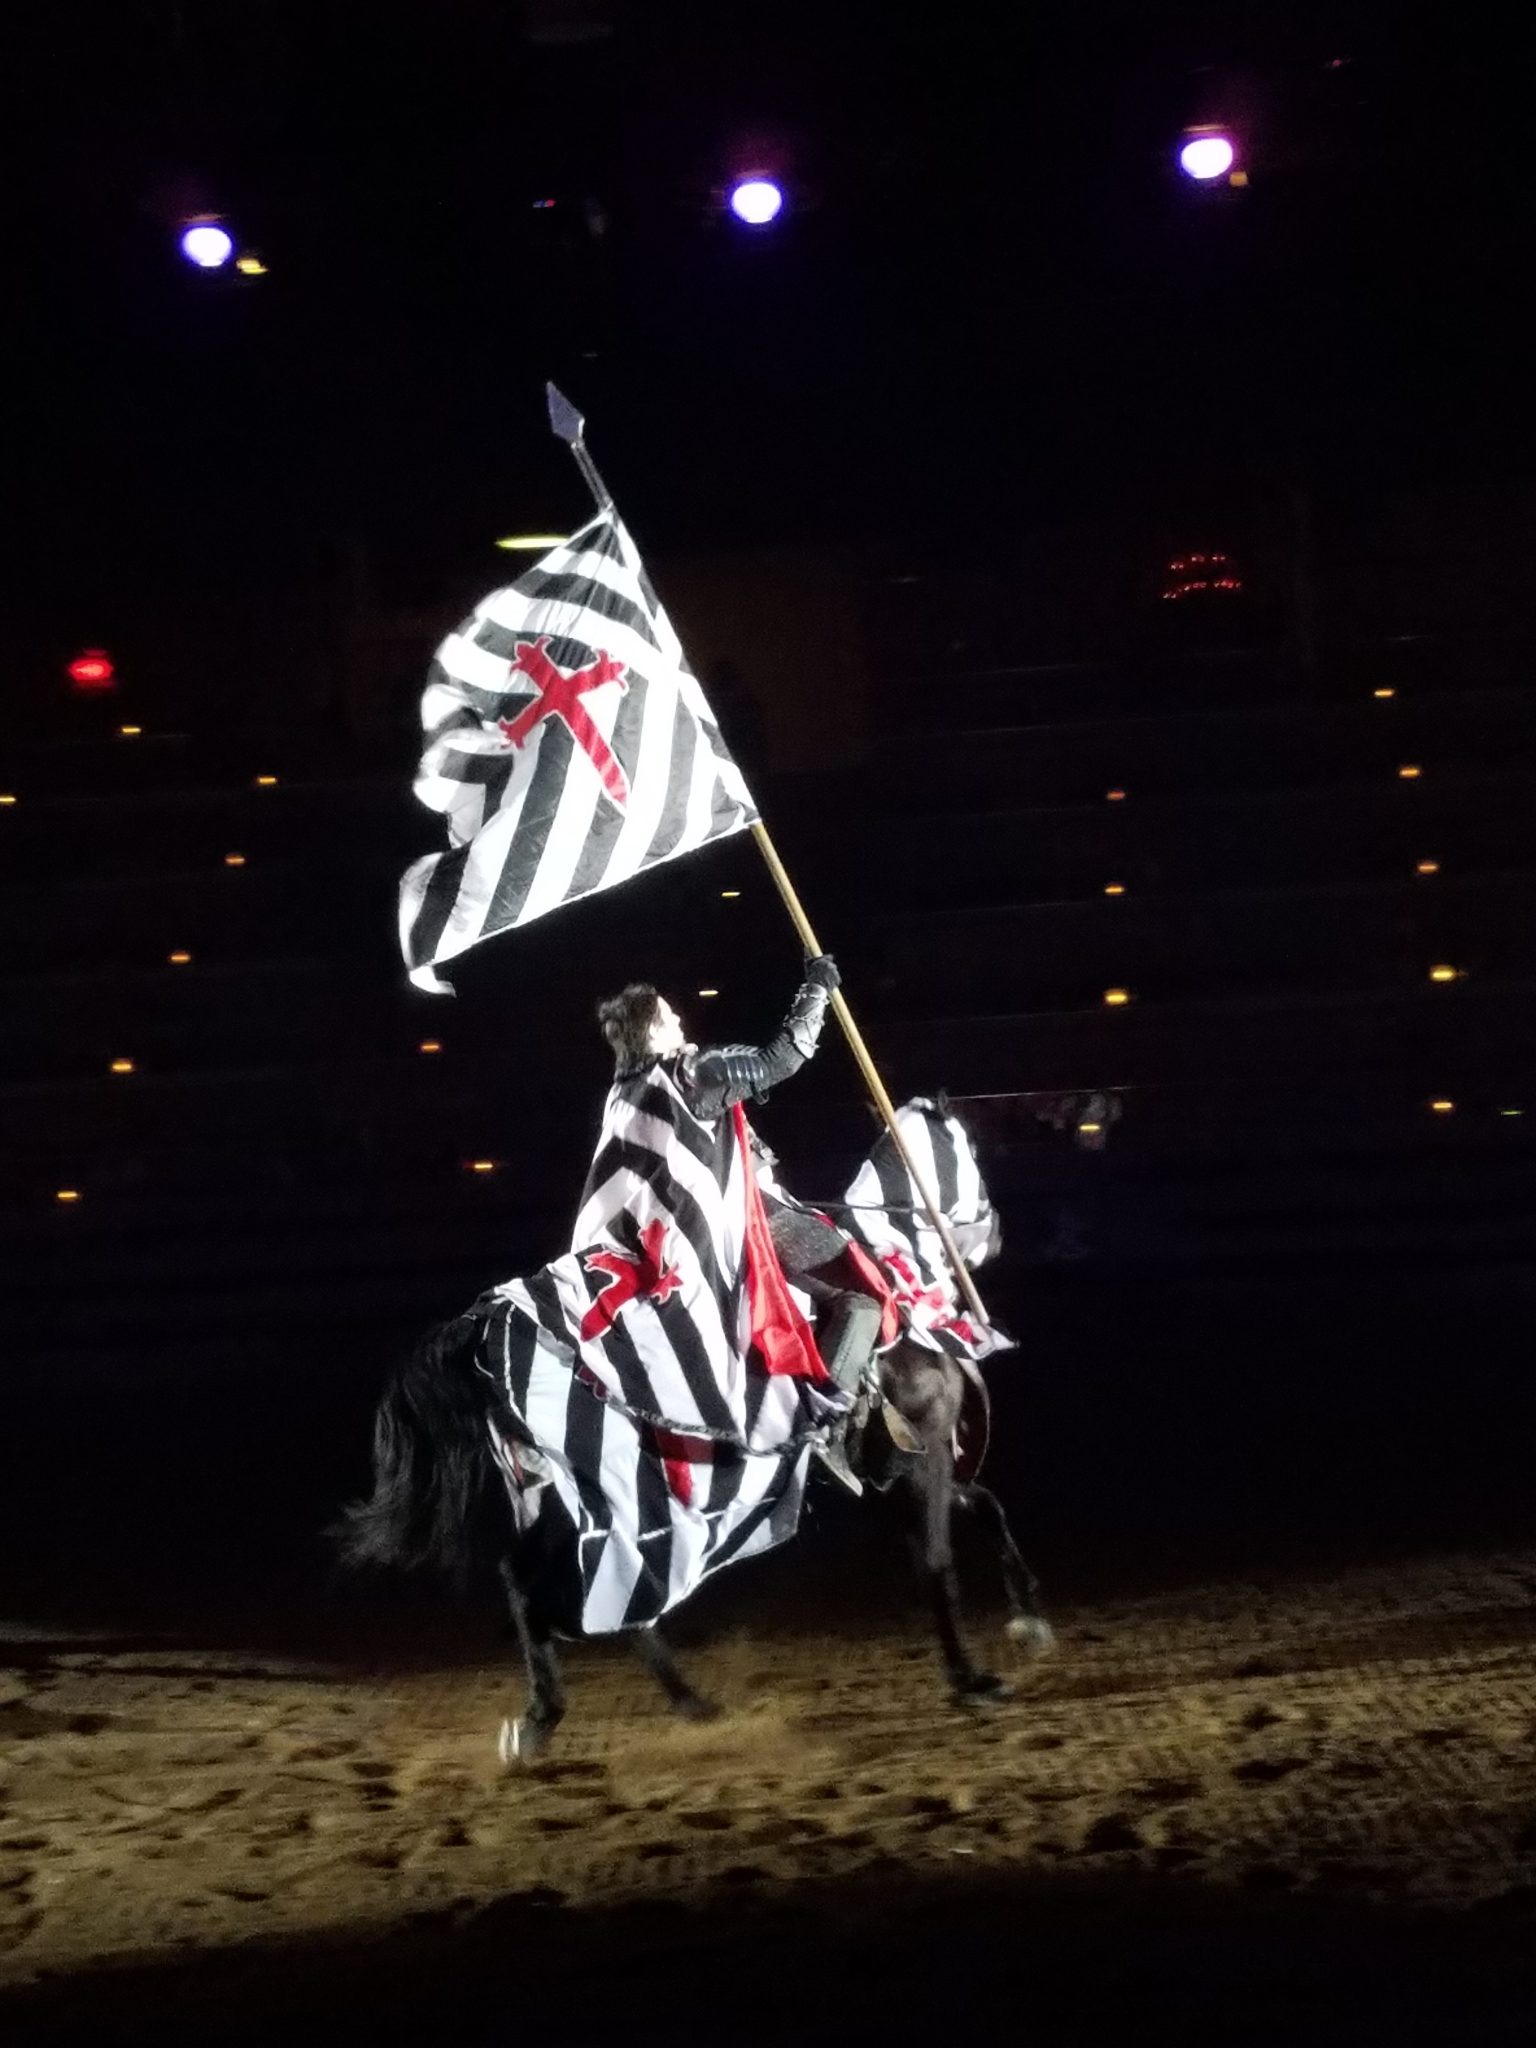 Medieval Times Dinner Show and Tournament in California Giveaway!